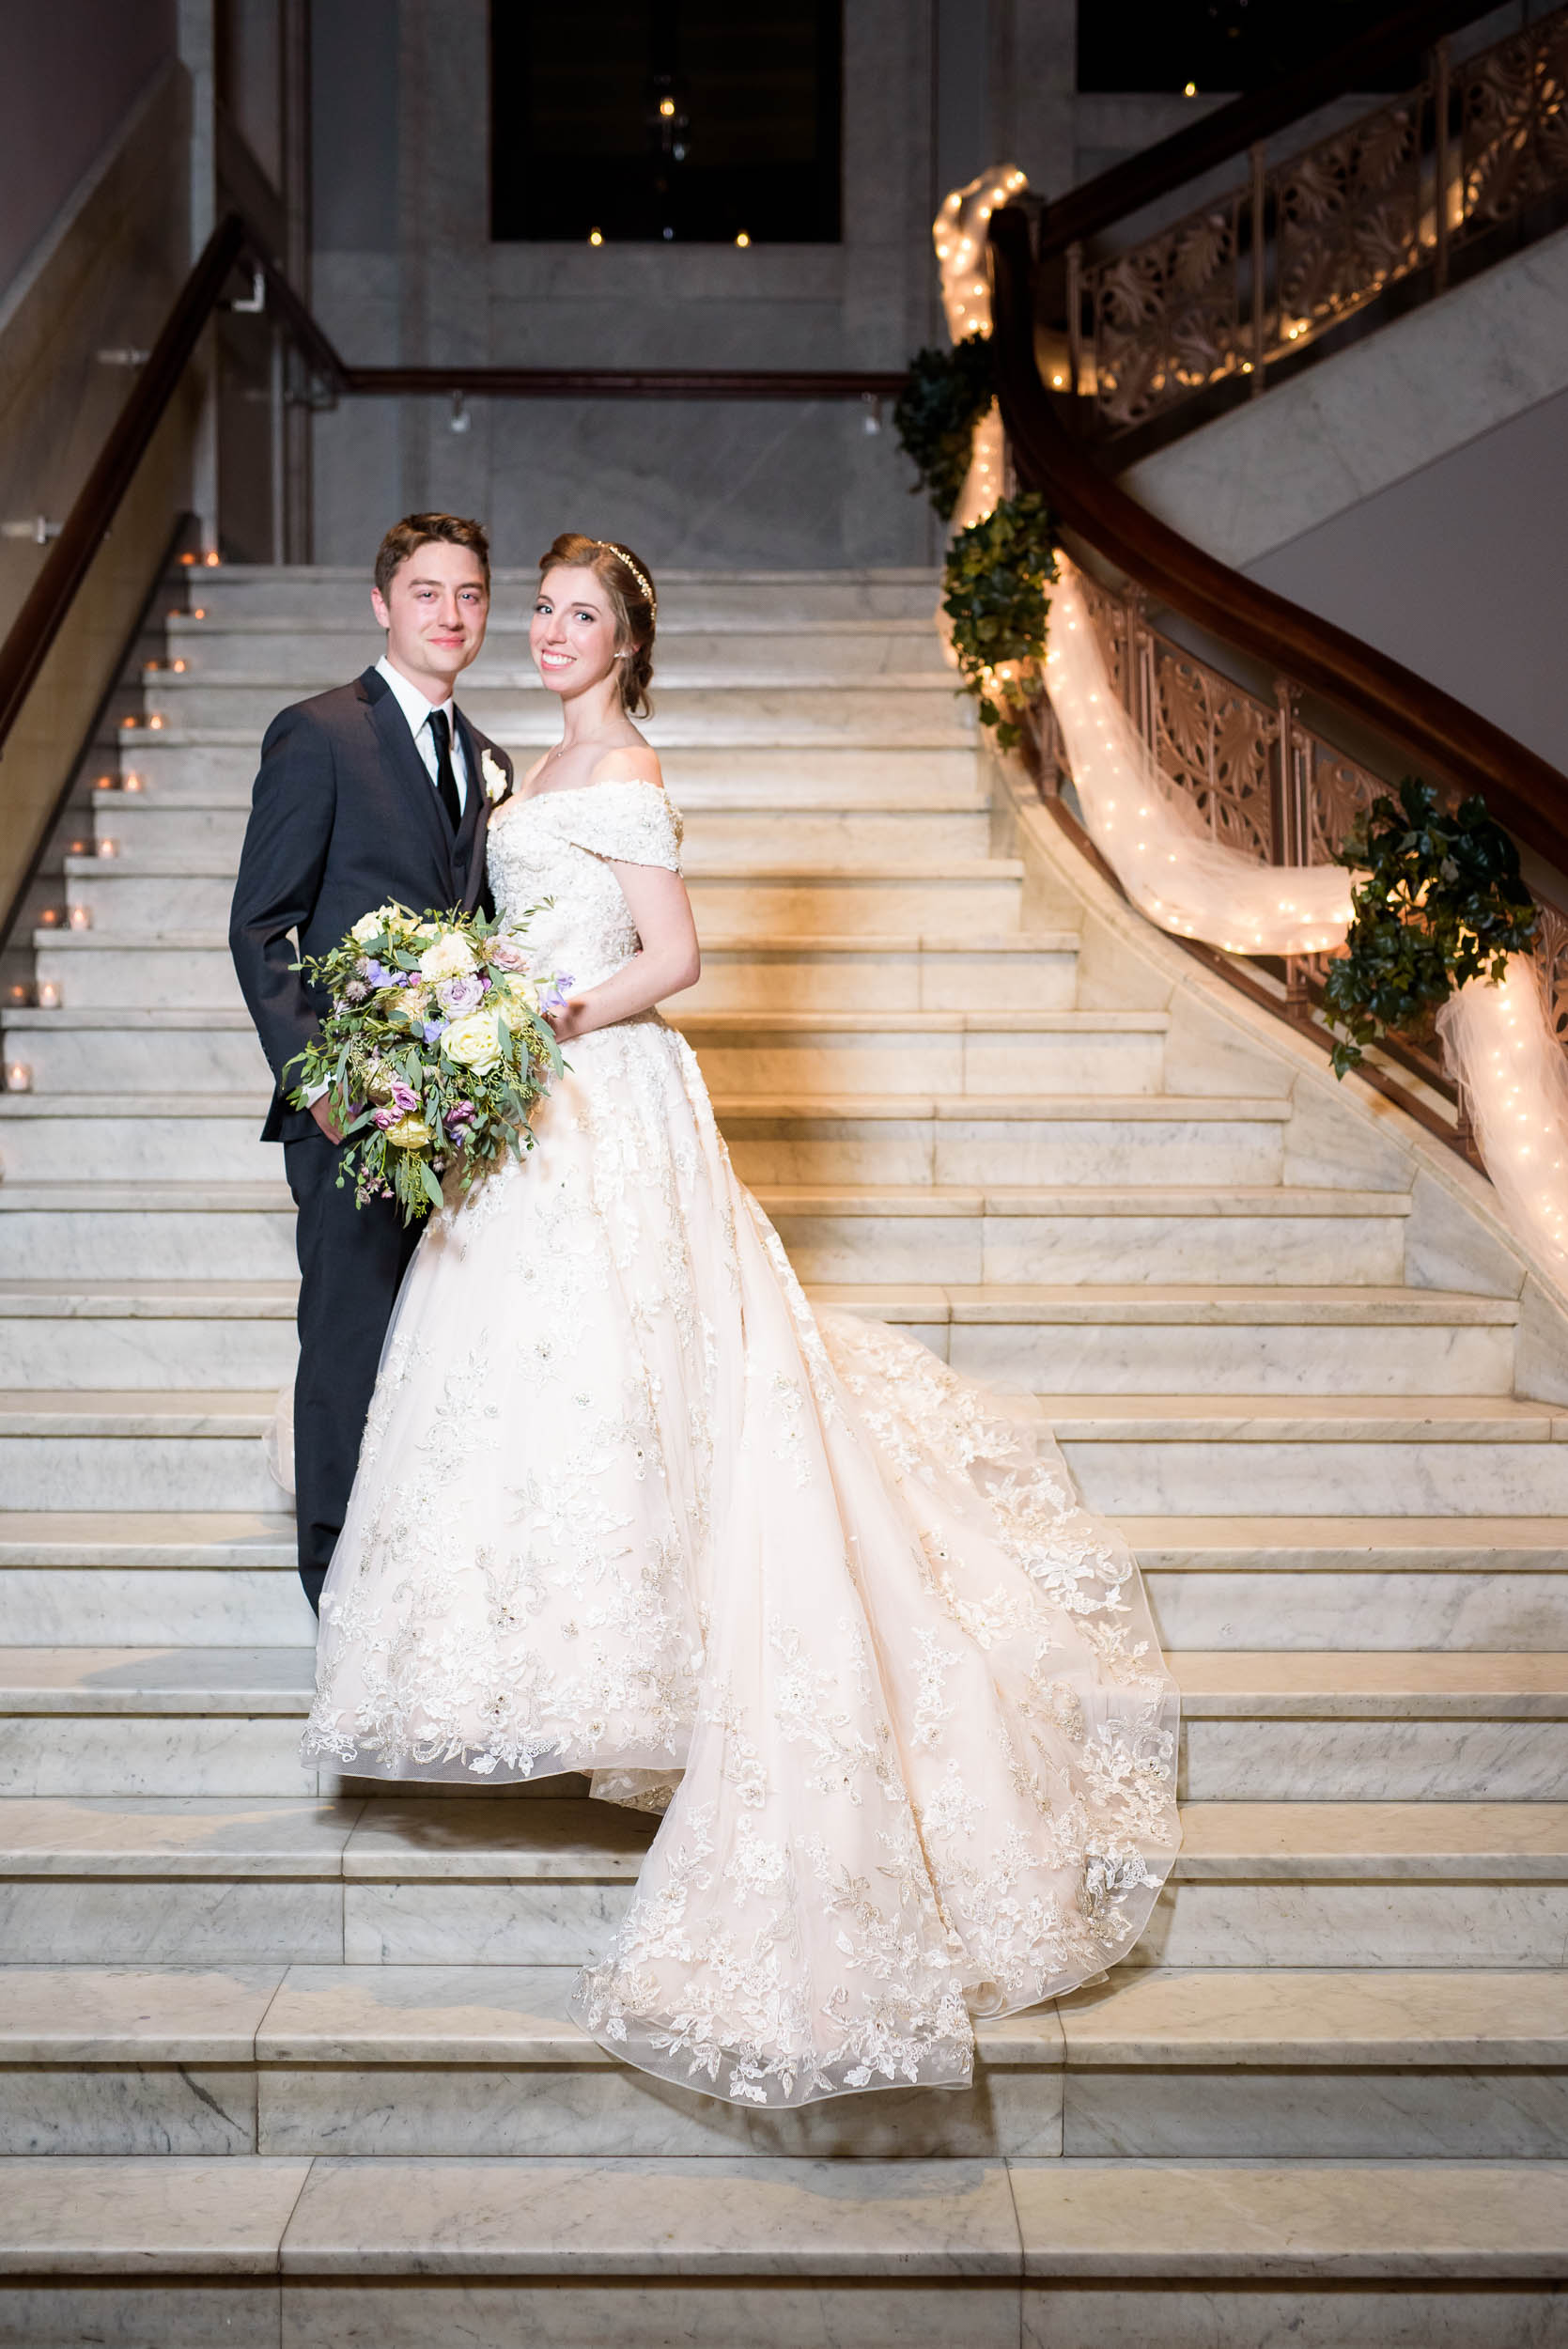 Wedding portrait on the grand staircase during a Newberry Library Chicago wedding.